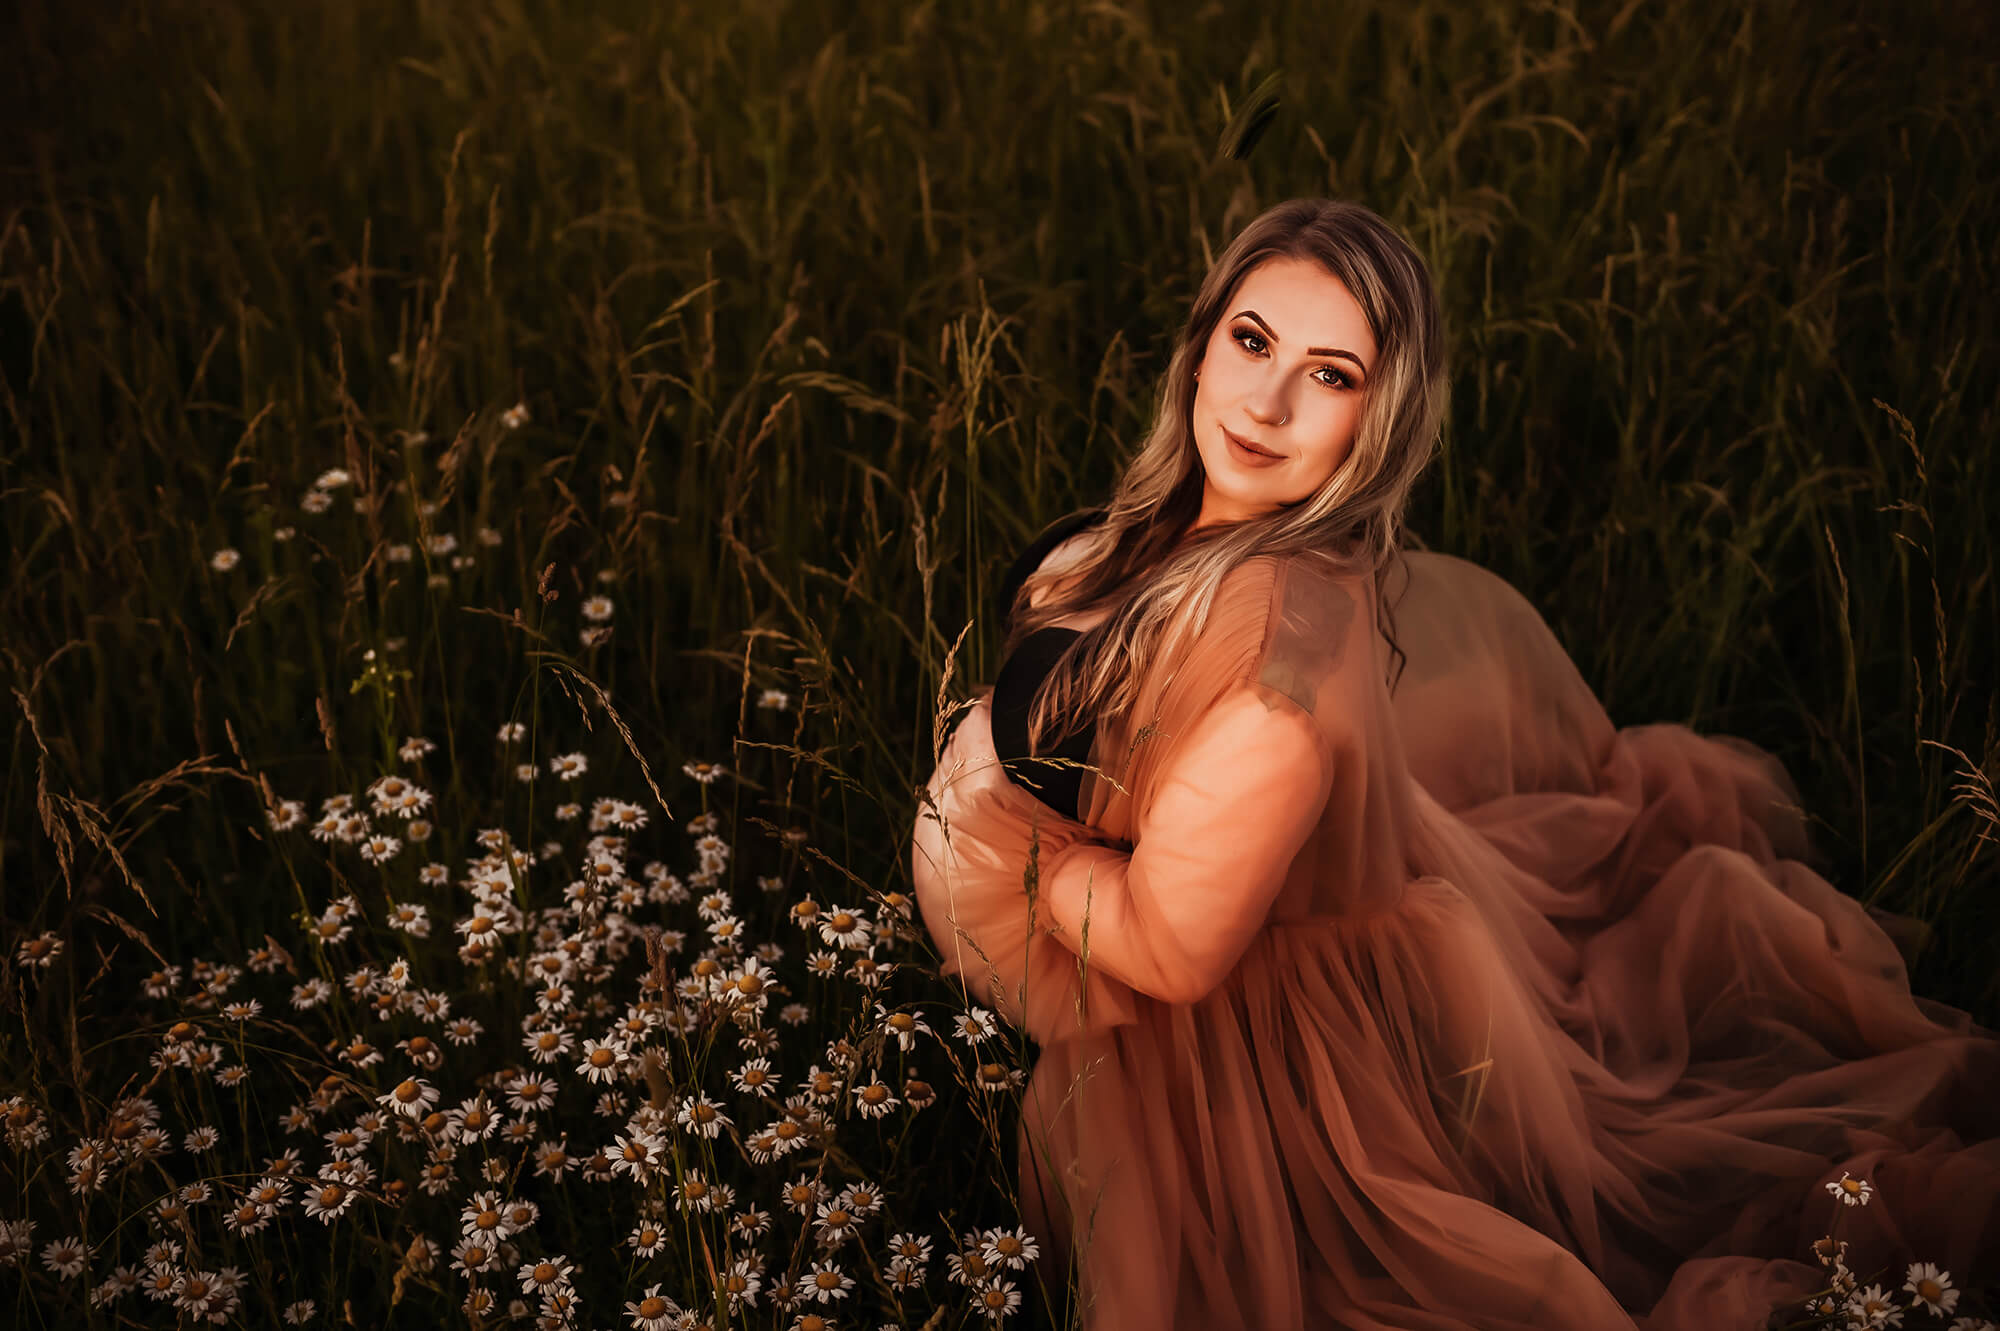 Springfield MO maternity photographer captures pregnant mom kneeling in flower field after mercy obgyn in Springfield MO